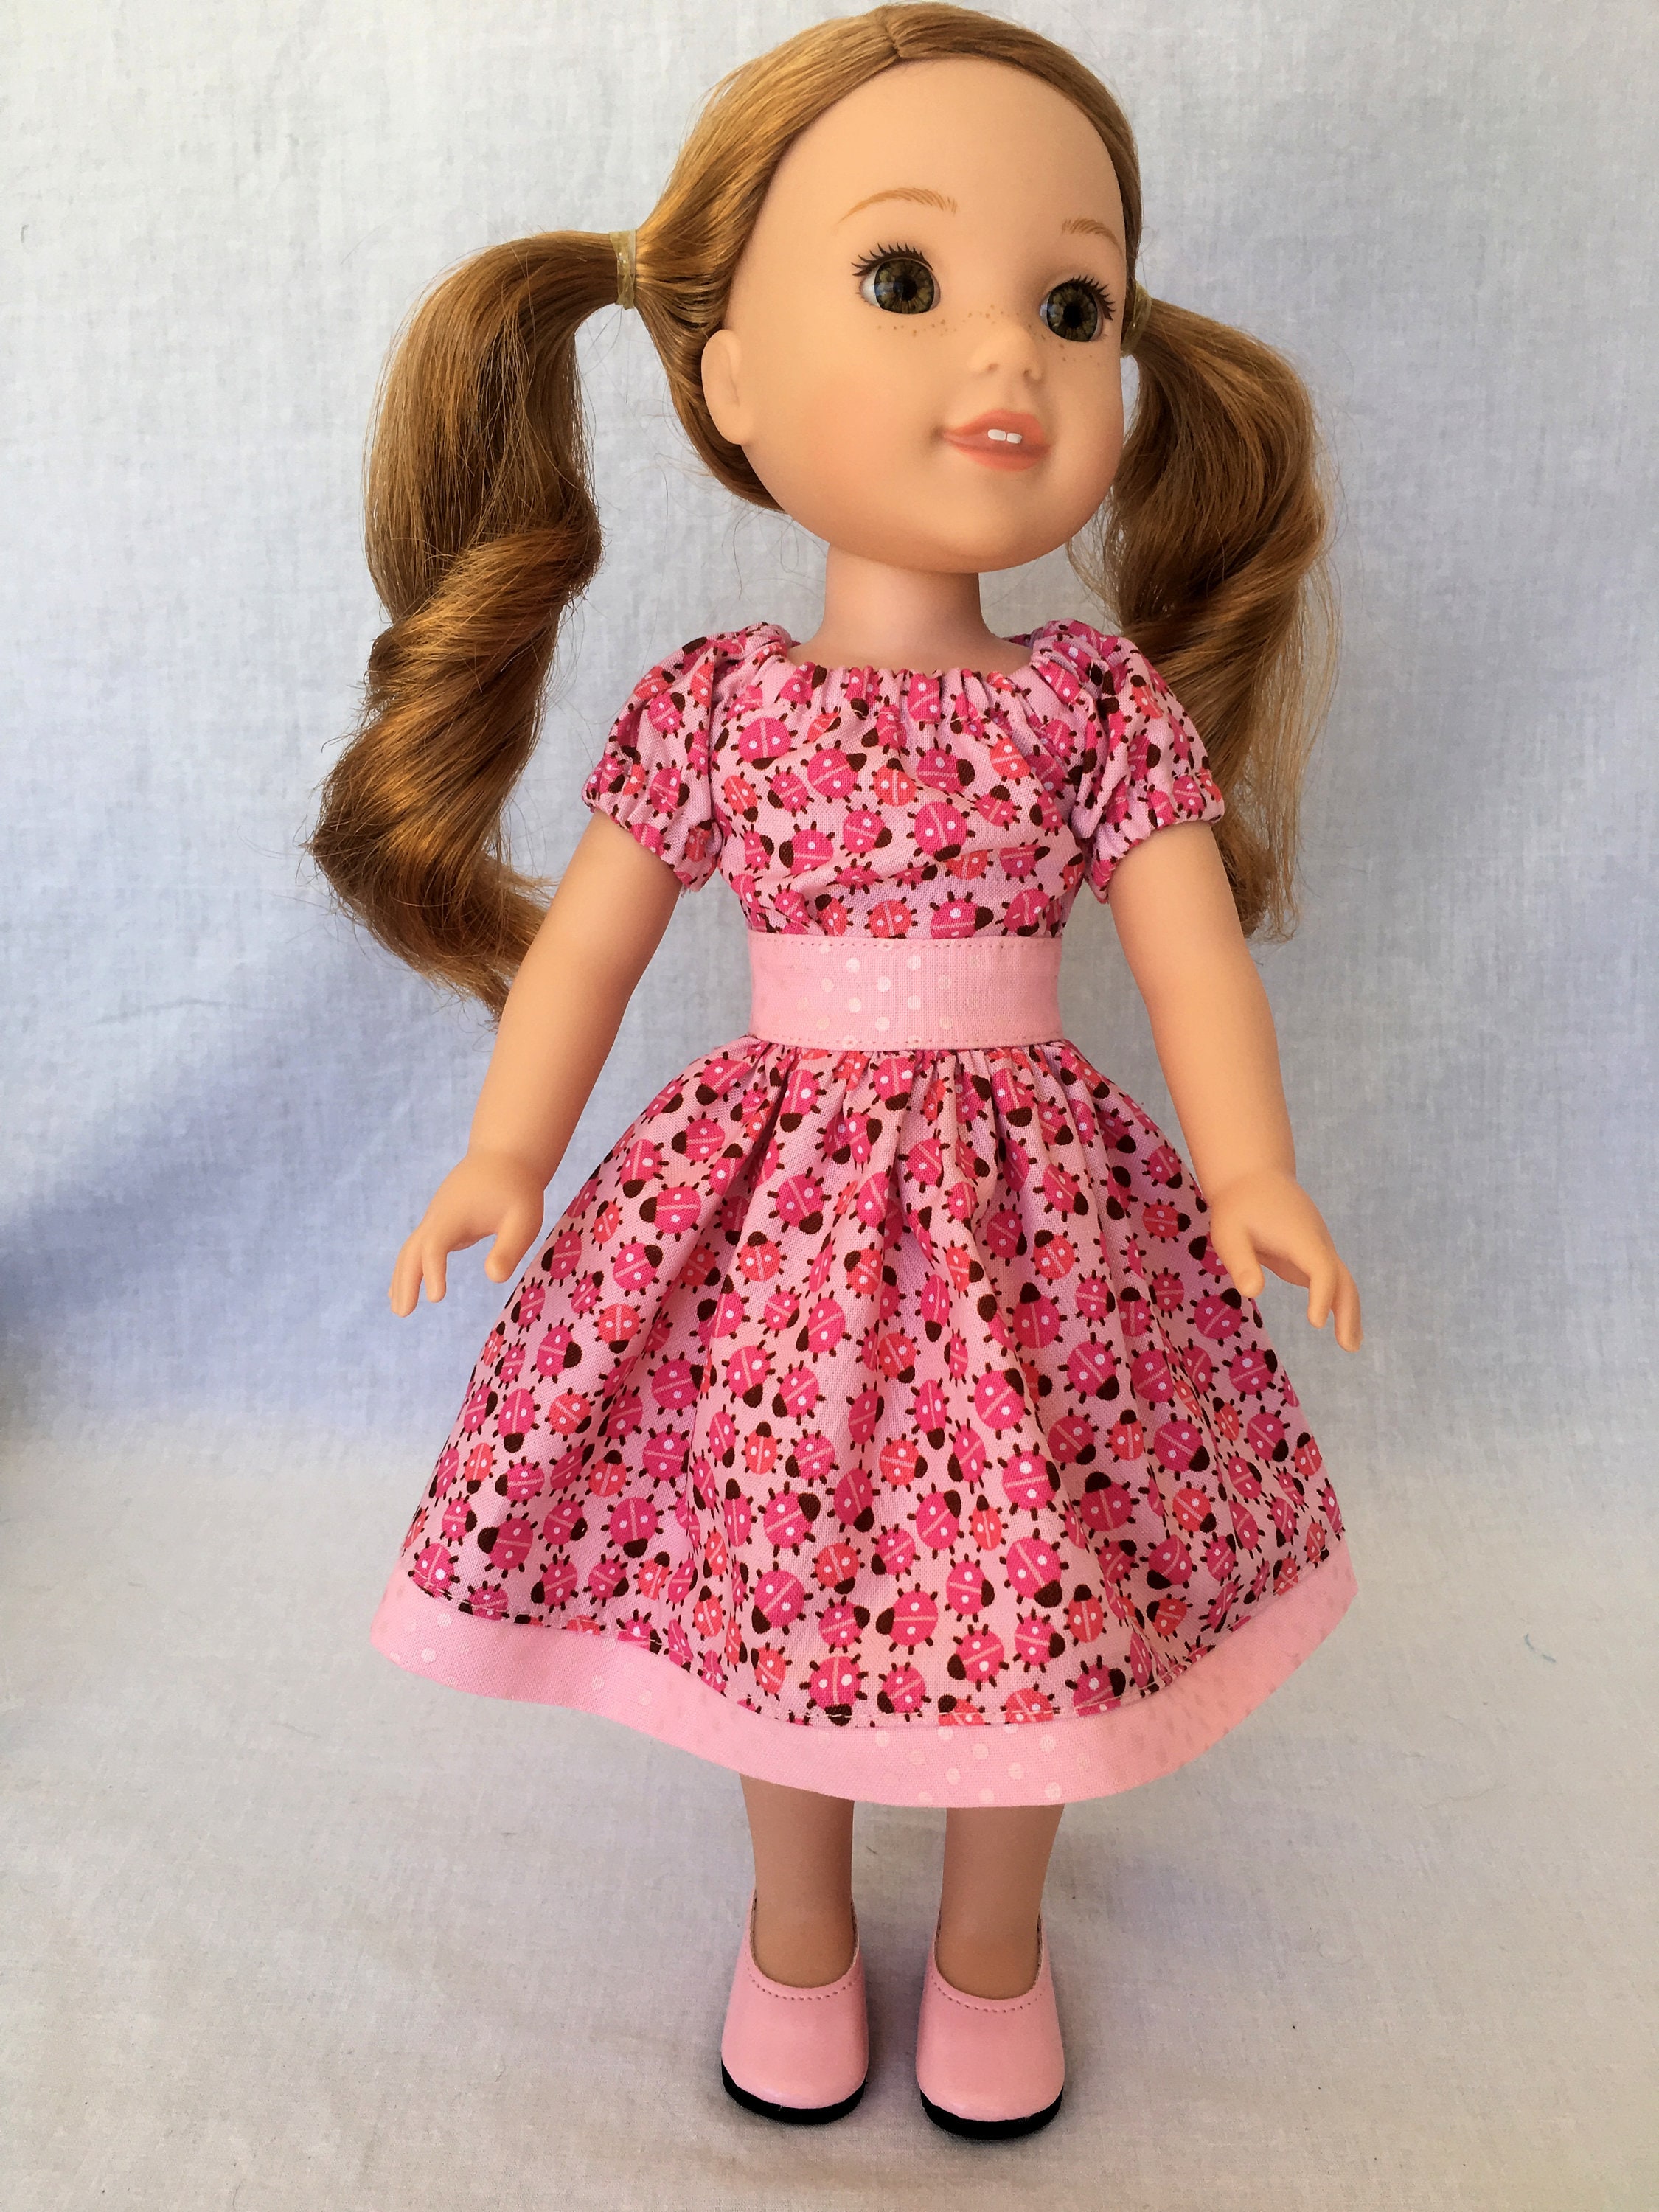 Wellie Wisher dress 15 inch doll clothes Wellie Wish | Etsy